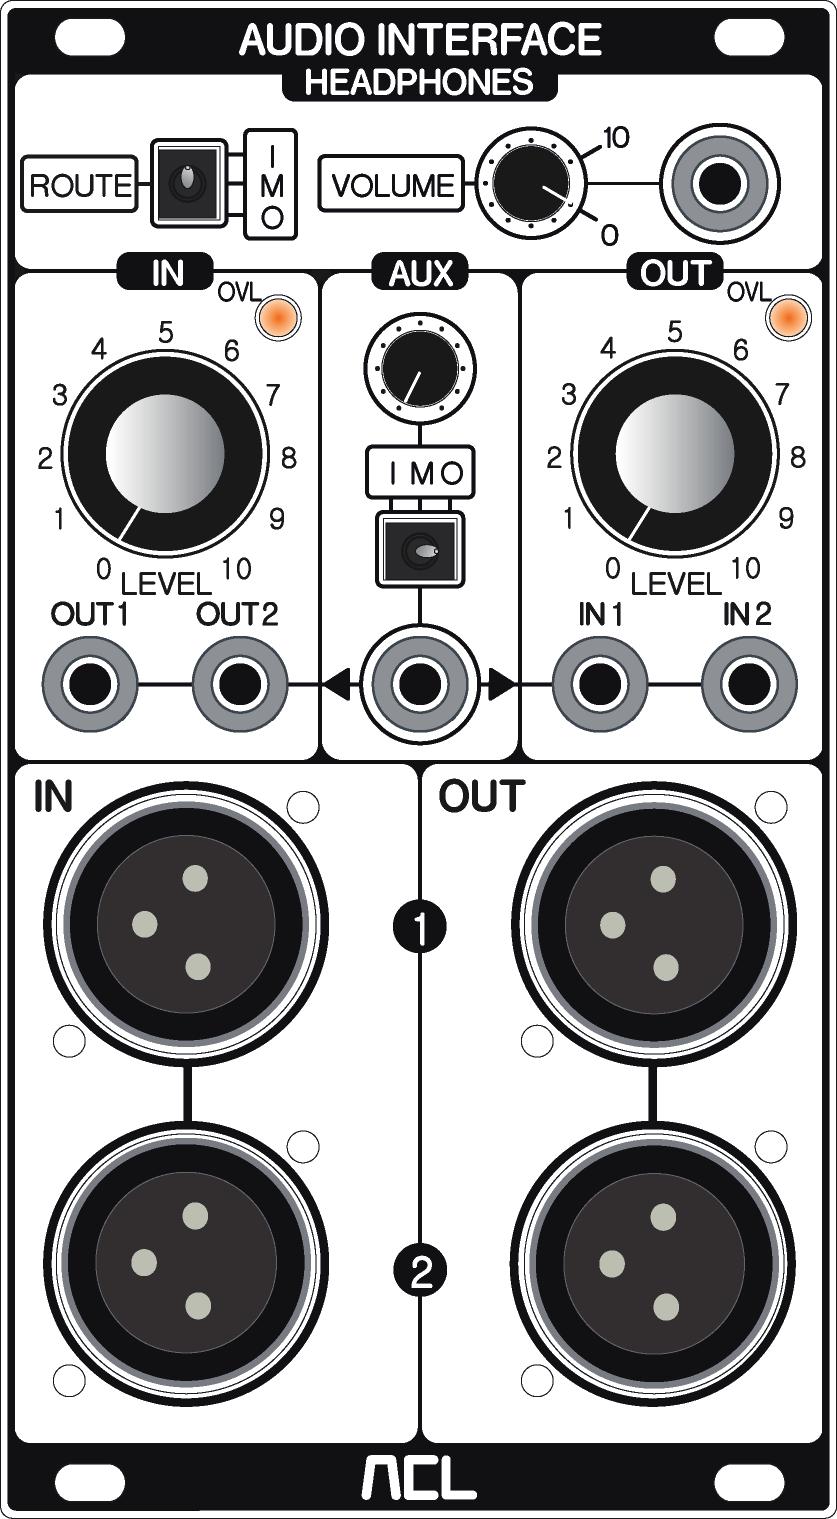 4. FUNCTION OF PANEL COMPONENTS 7 8 9 1 "OUT LEVEL" knob Output volume control for 3 "OUT" XLR sockets. 4 14 10 1 13 2 "IN 1" "IN 2" jacks 3.5mm audio inputs (mono) for AC coupled unbalanced signals.